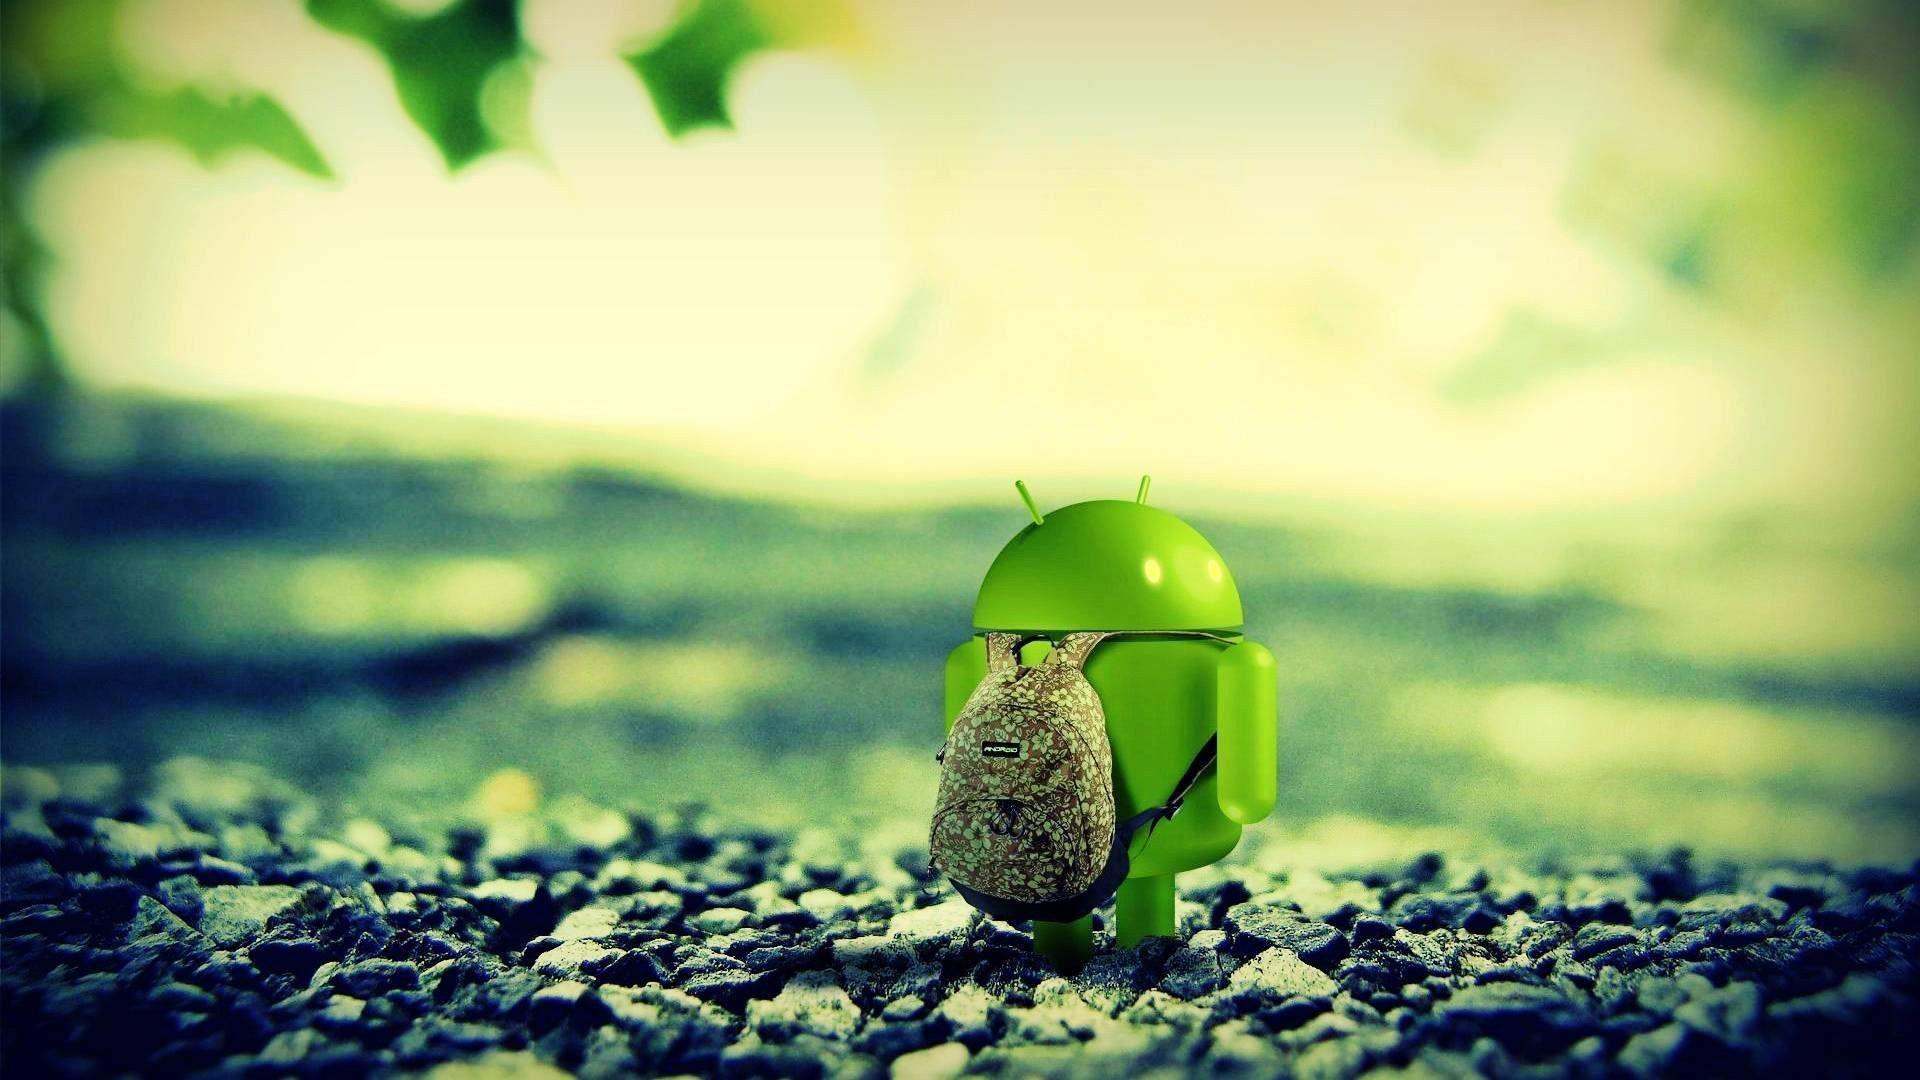 Hd Wallpaper for android Fresh Pretty Cool Over 100 Beautiful Laptop